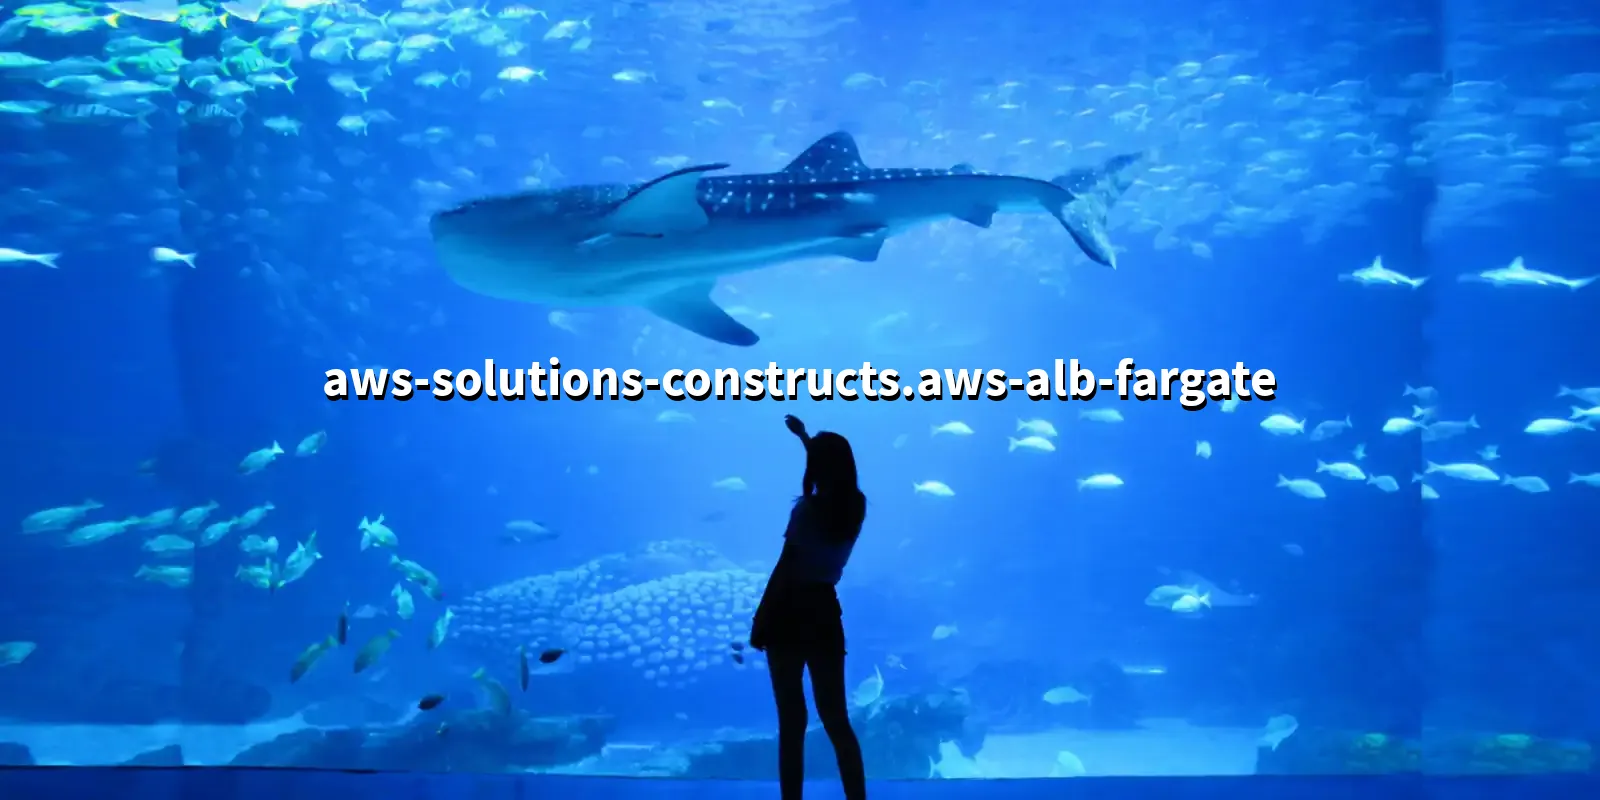 /pkg/a/aws-solutions-constructs/aws-solutions-constructs.aws-alb-fargate-banner.webp